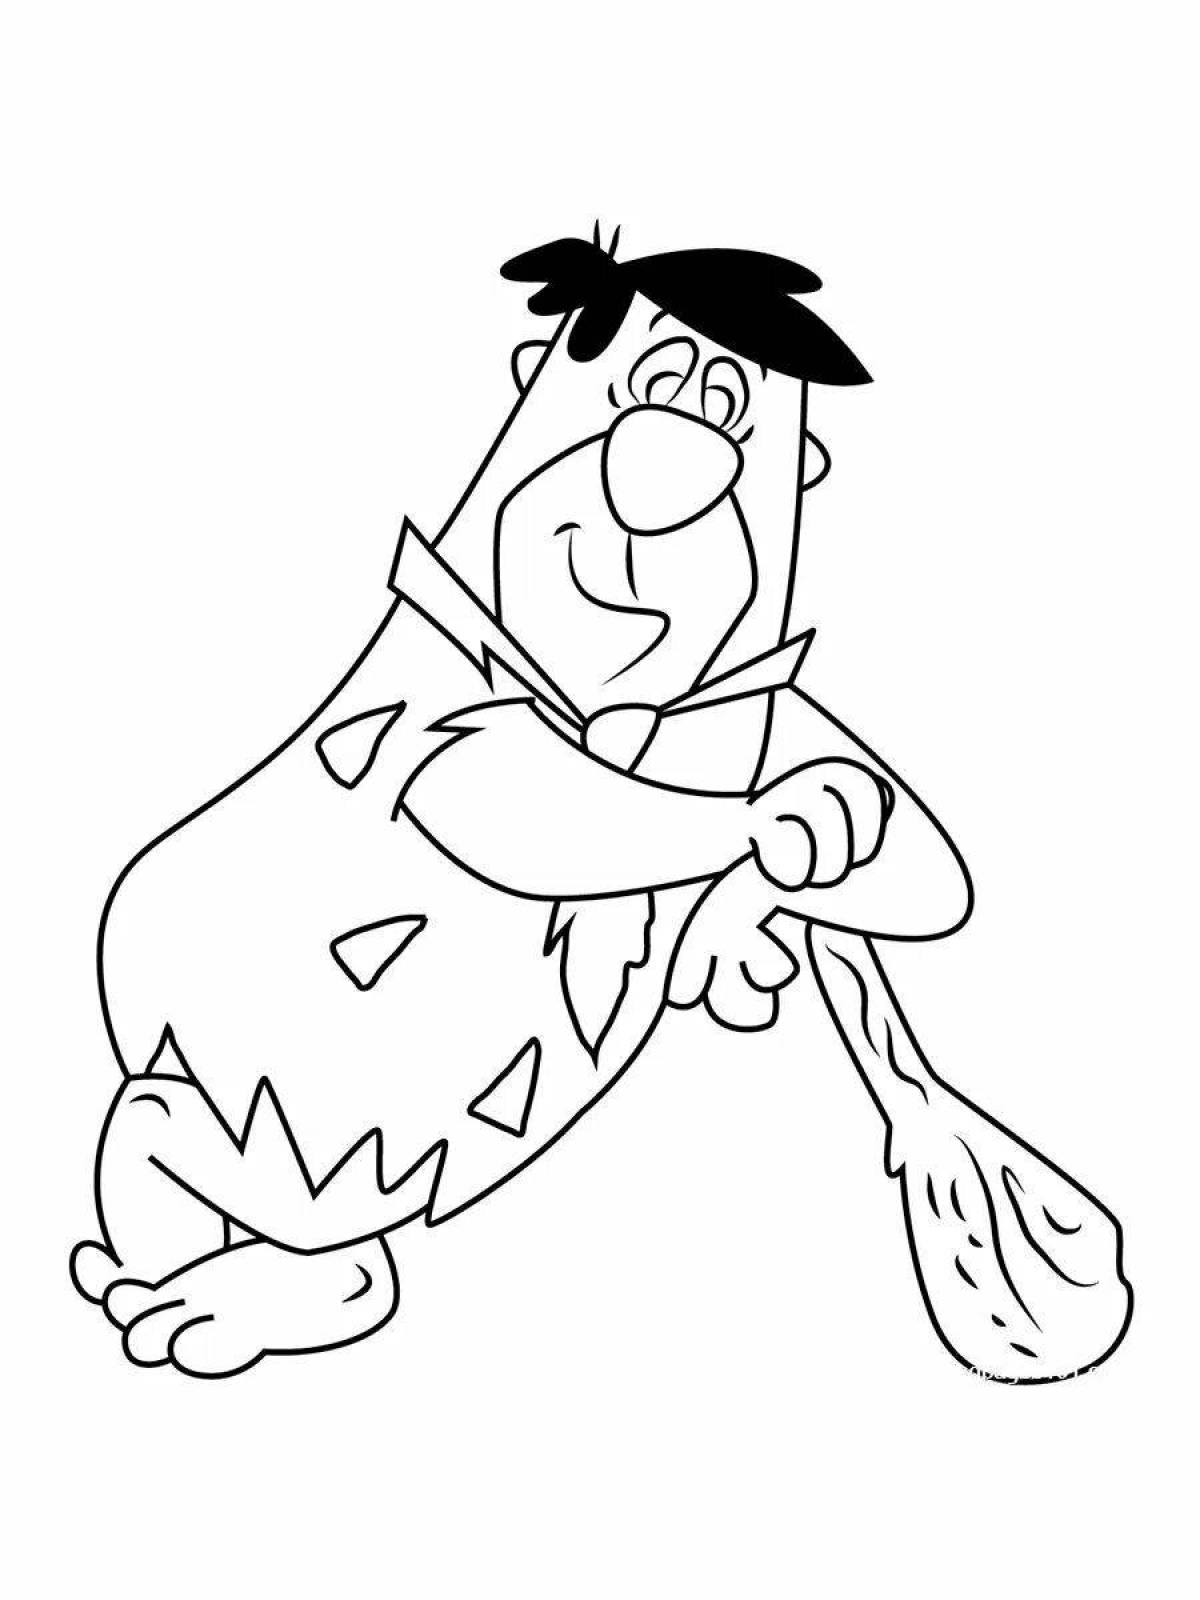 Attractive fred flintstone coloring page